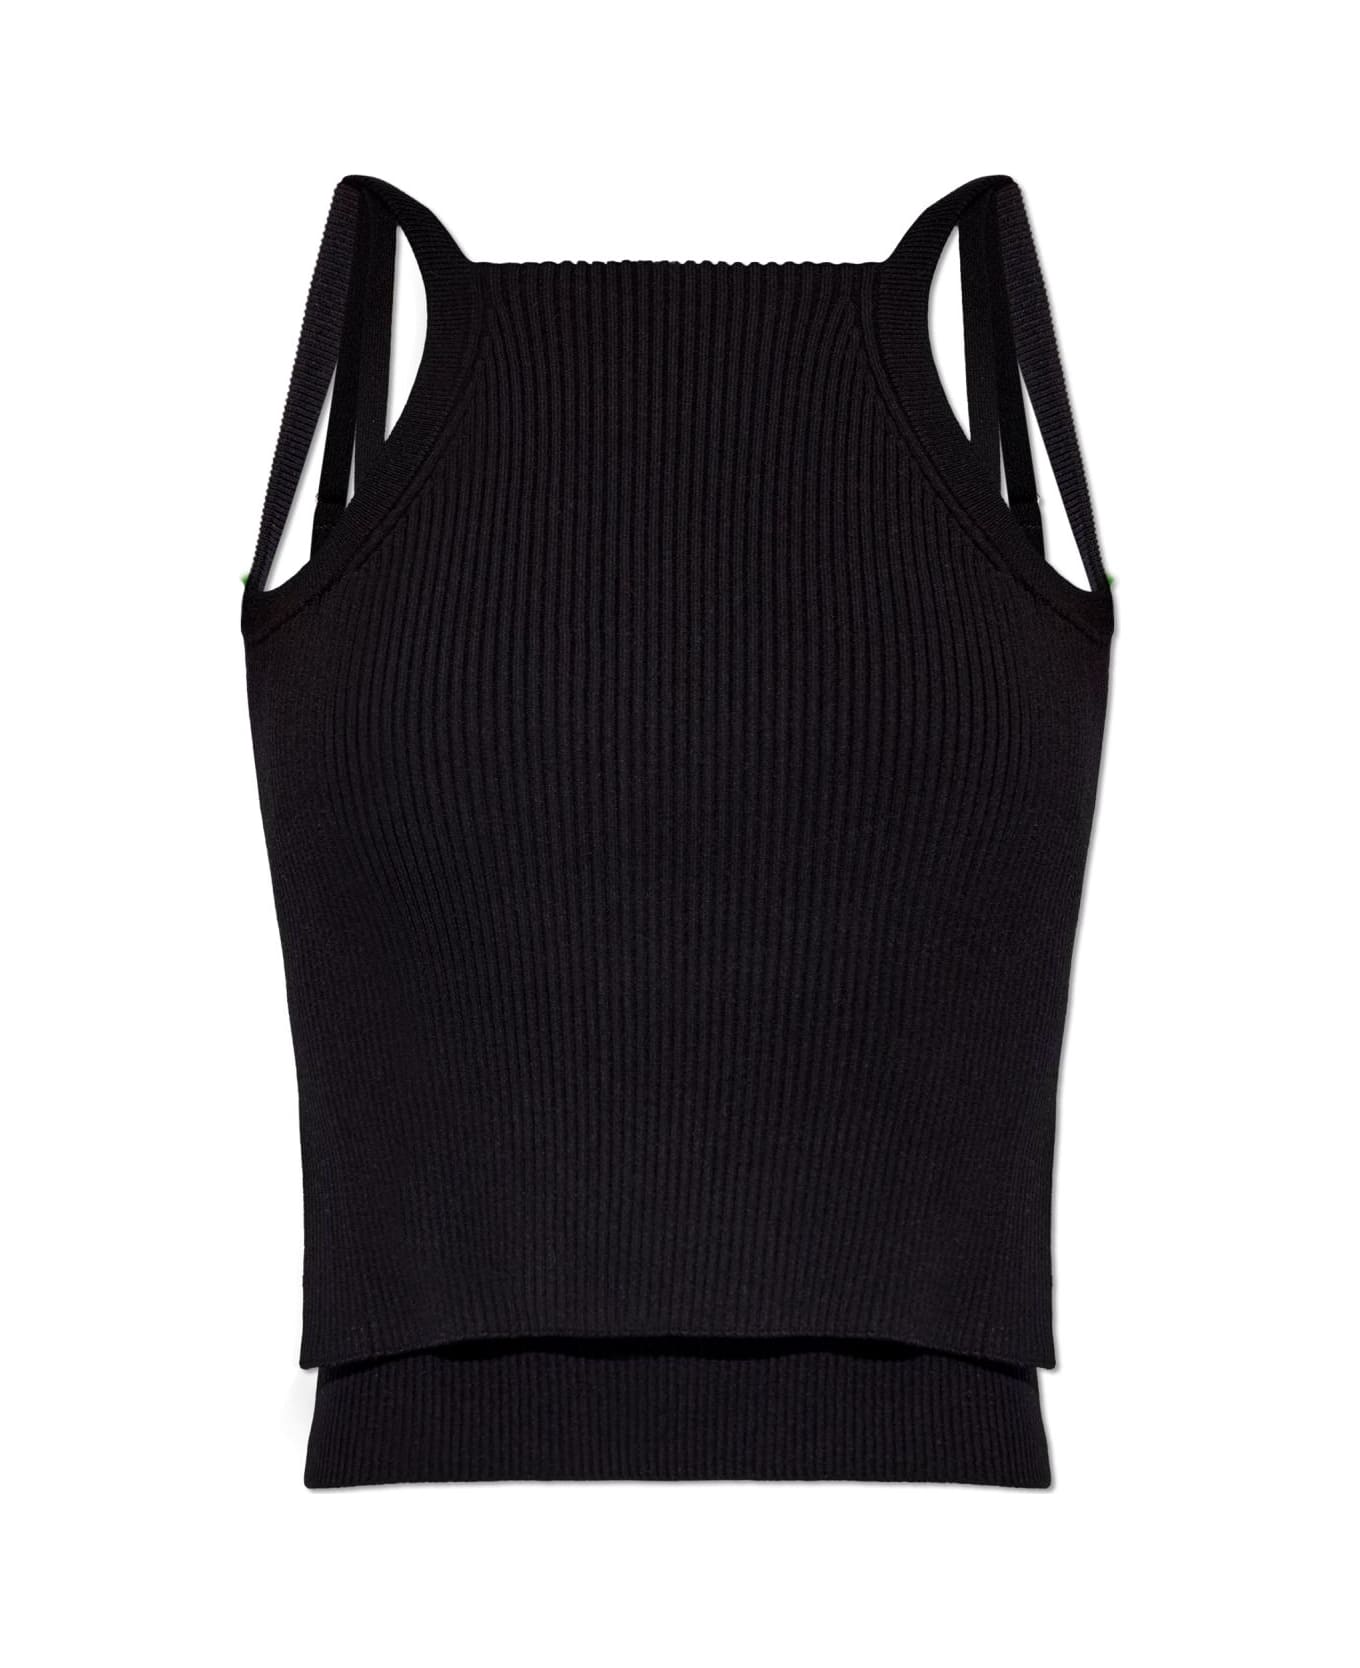 Emporio Armani Top From The 'sustainability' Collection - Black ブラウス